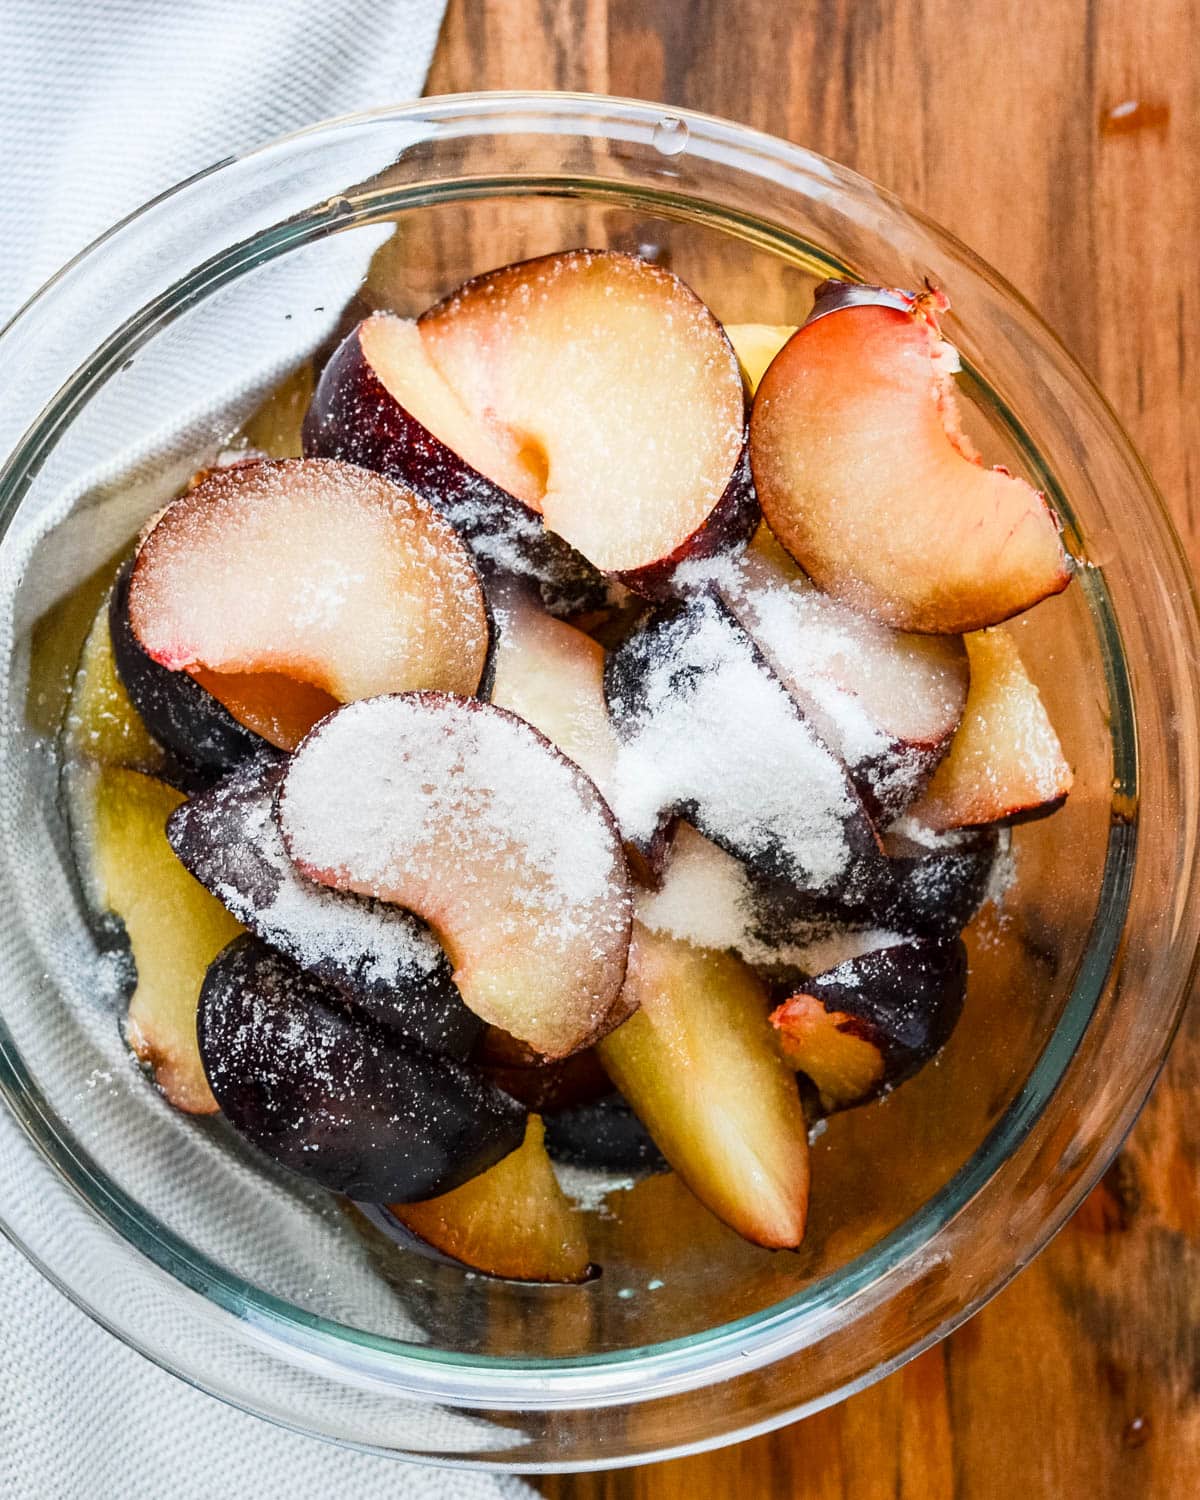 Adding sugar to the sliced plums.